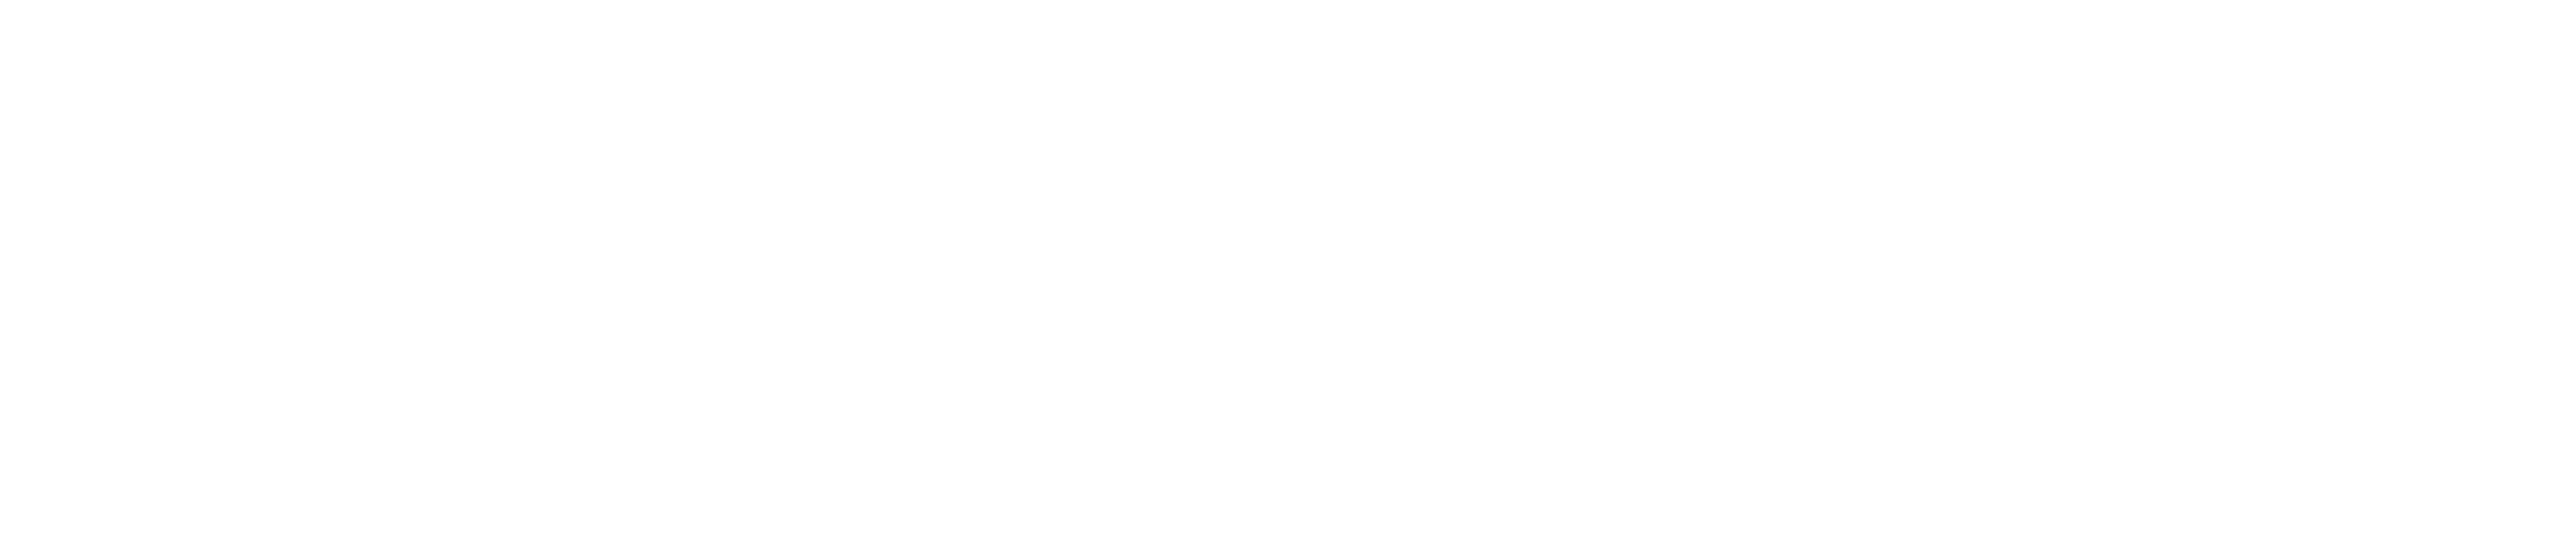 Boys & Girls Clubs of the Midlands 